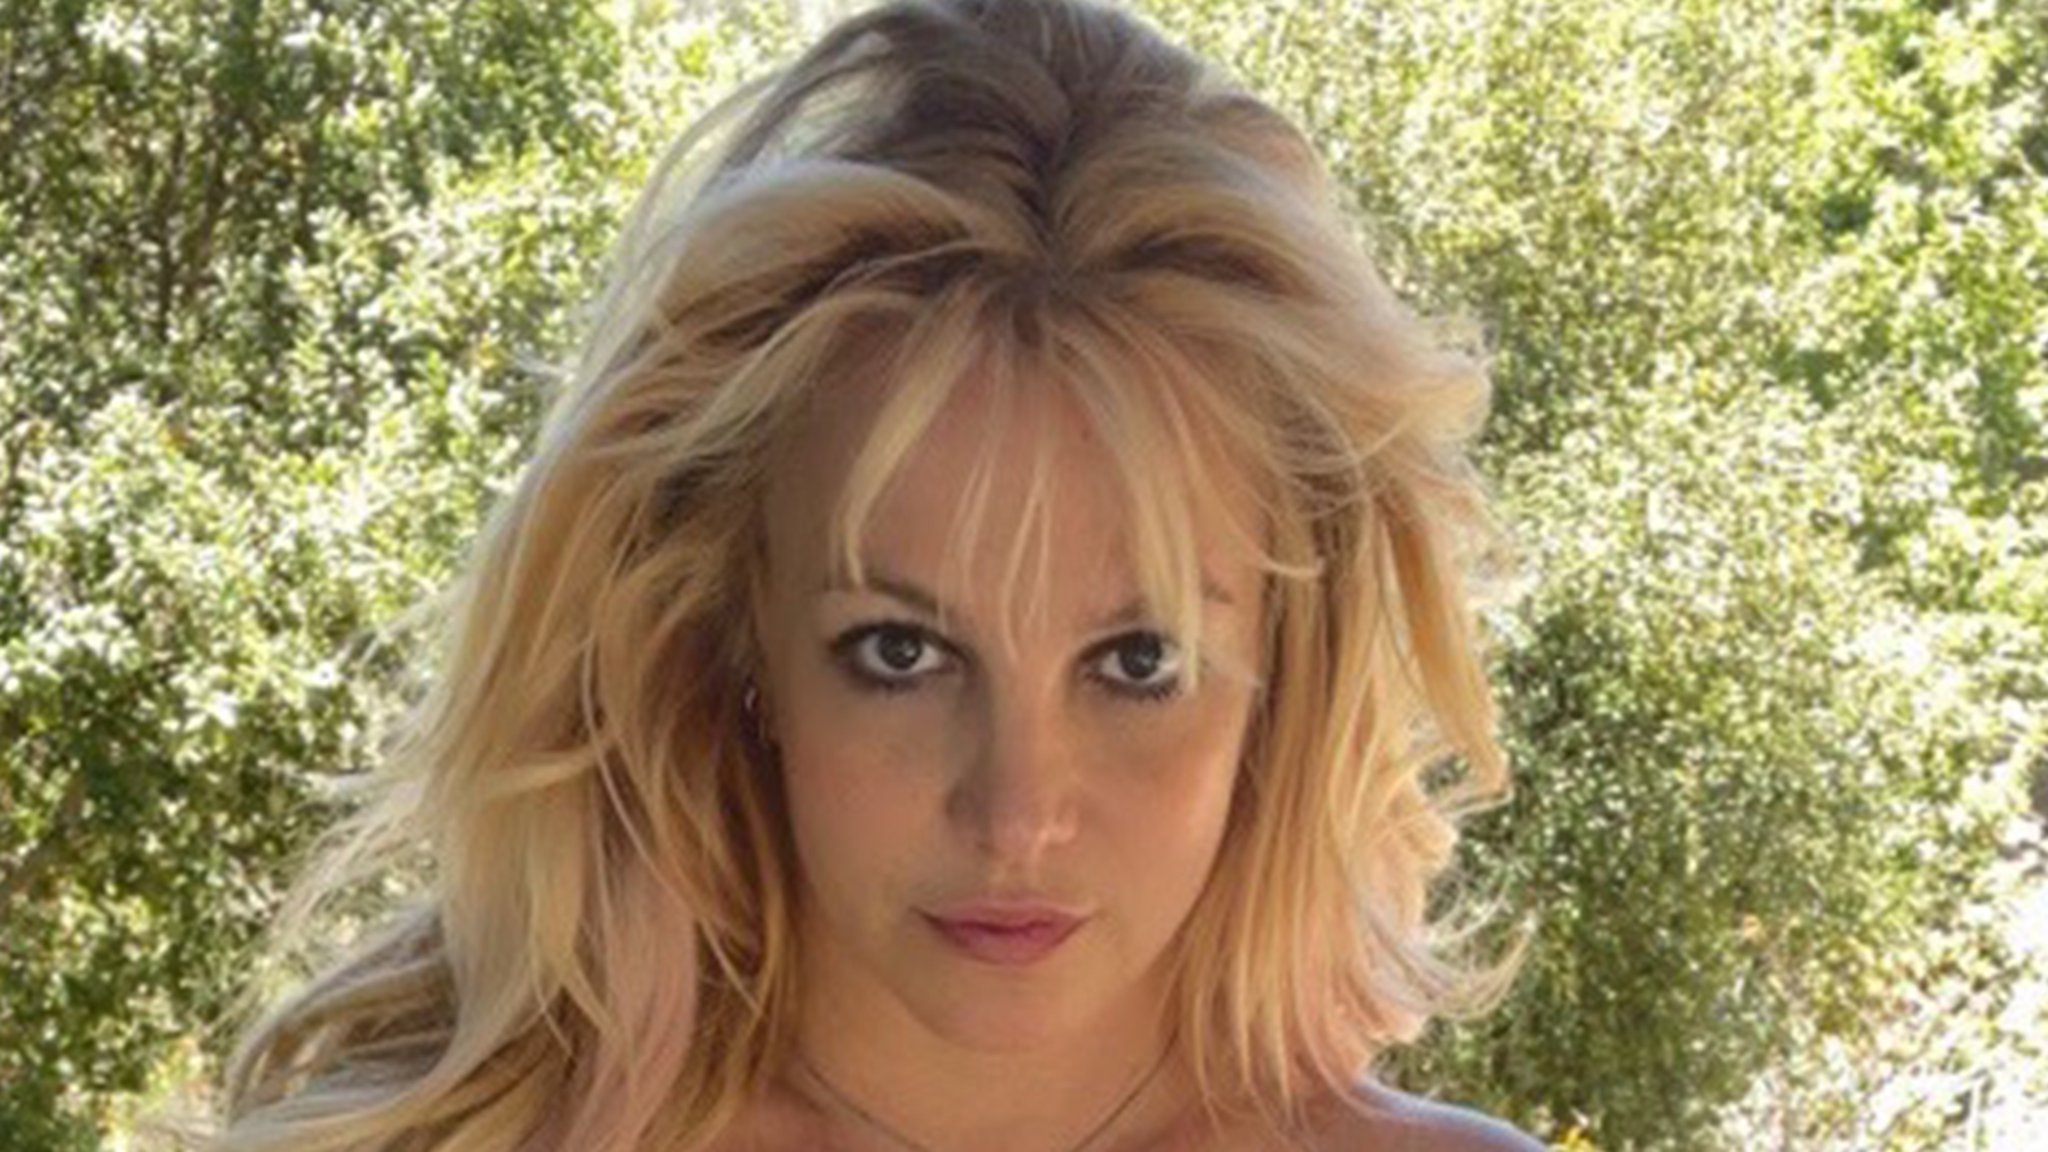 Cops have been called to Britney Spears’ home after she deleted her Instagram account